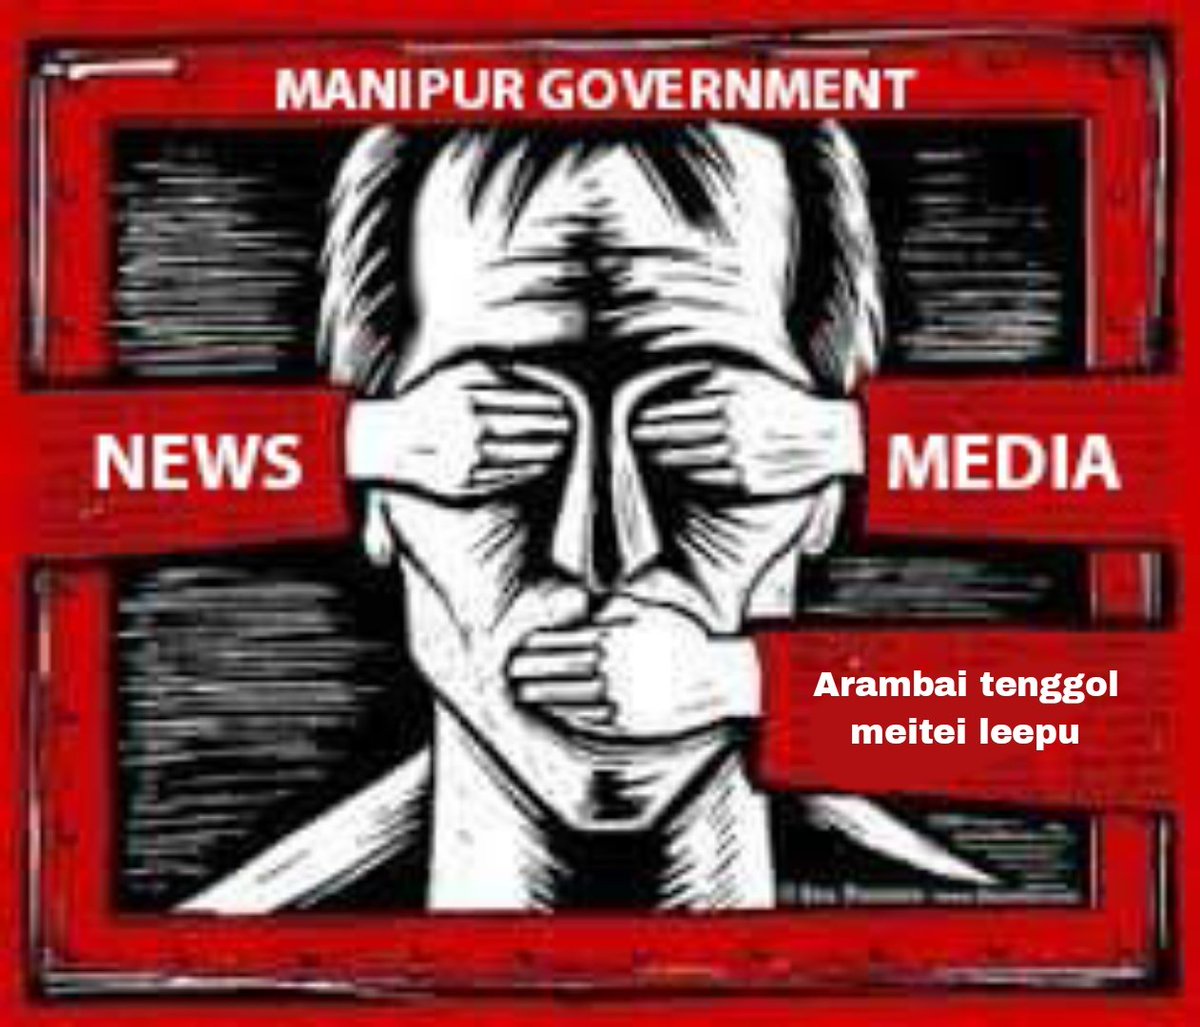 Manipur, a land of hope and possibility
Where peace and justice can be restored with dignity
But now, a land of despair and vulnerability where lives and dreams are shattered by brutality and the media has hidden the truth
#KukiLivesMatter #SaveKukiLives
#ManipurViolence